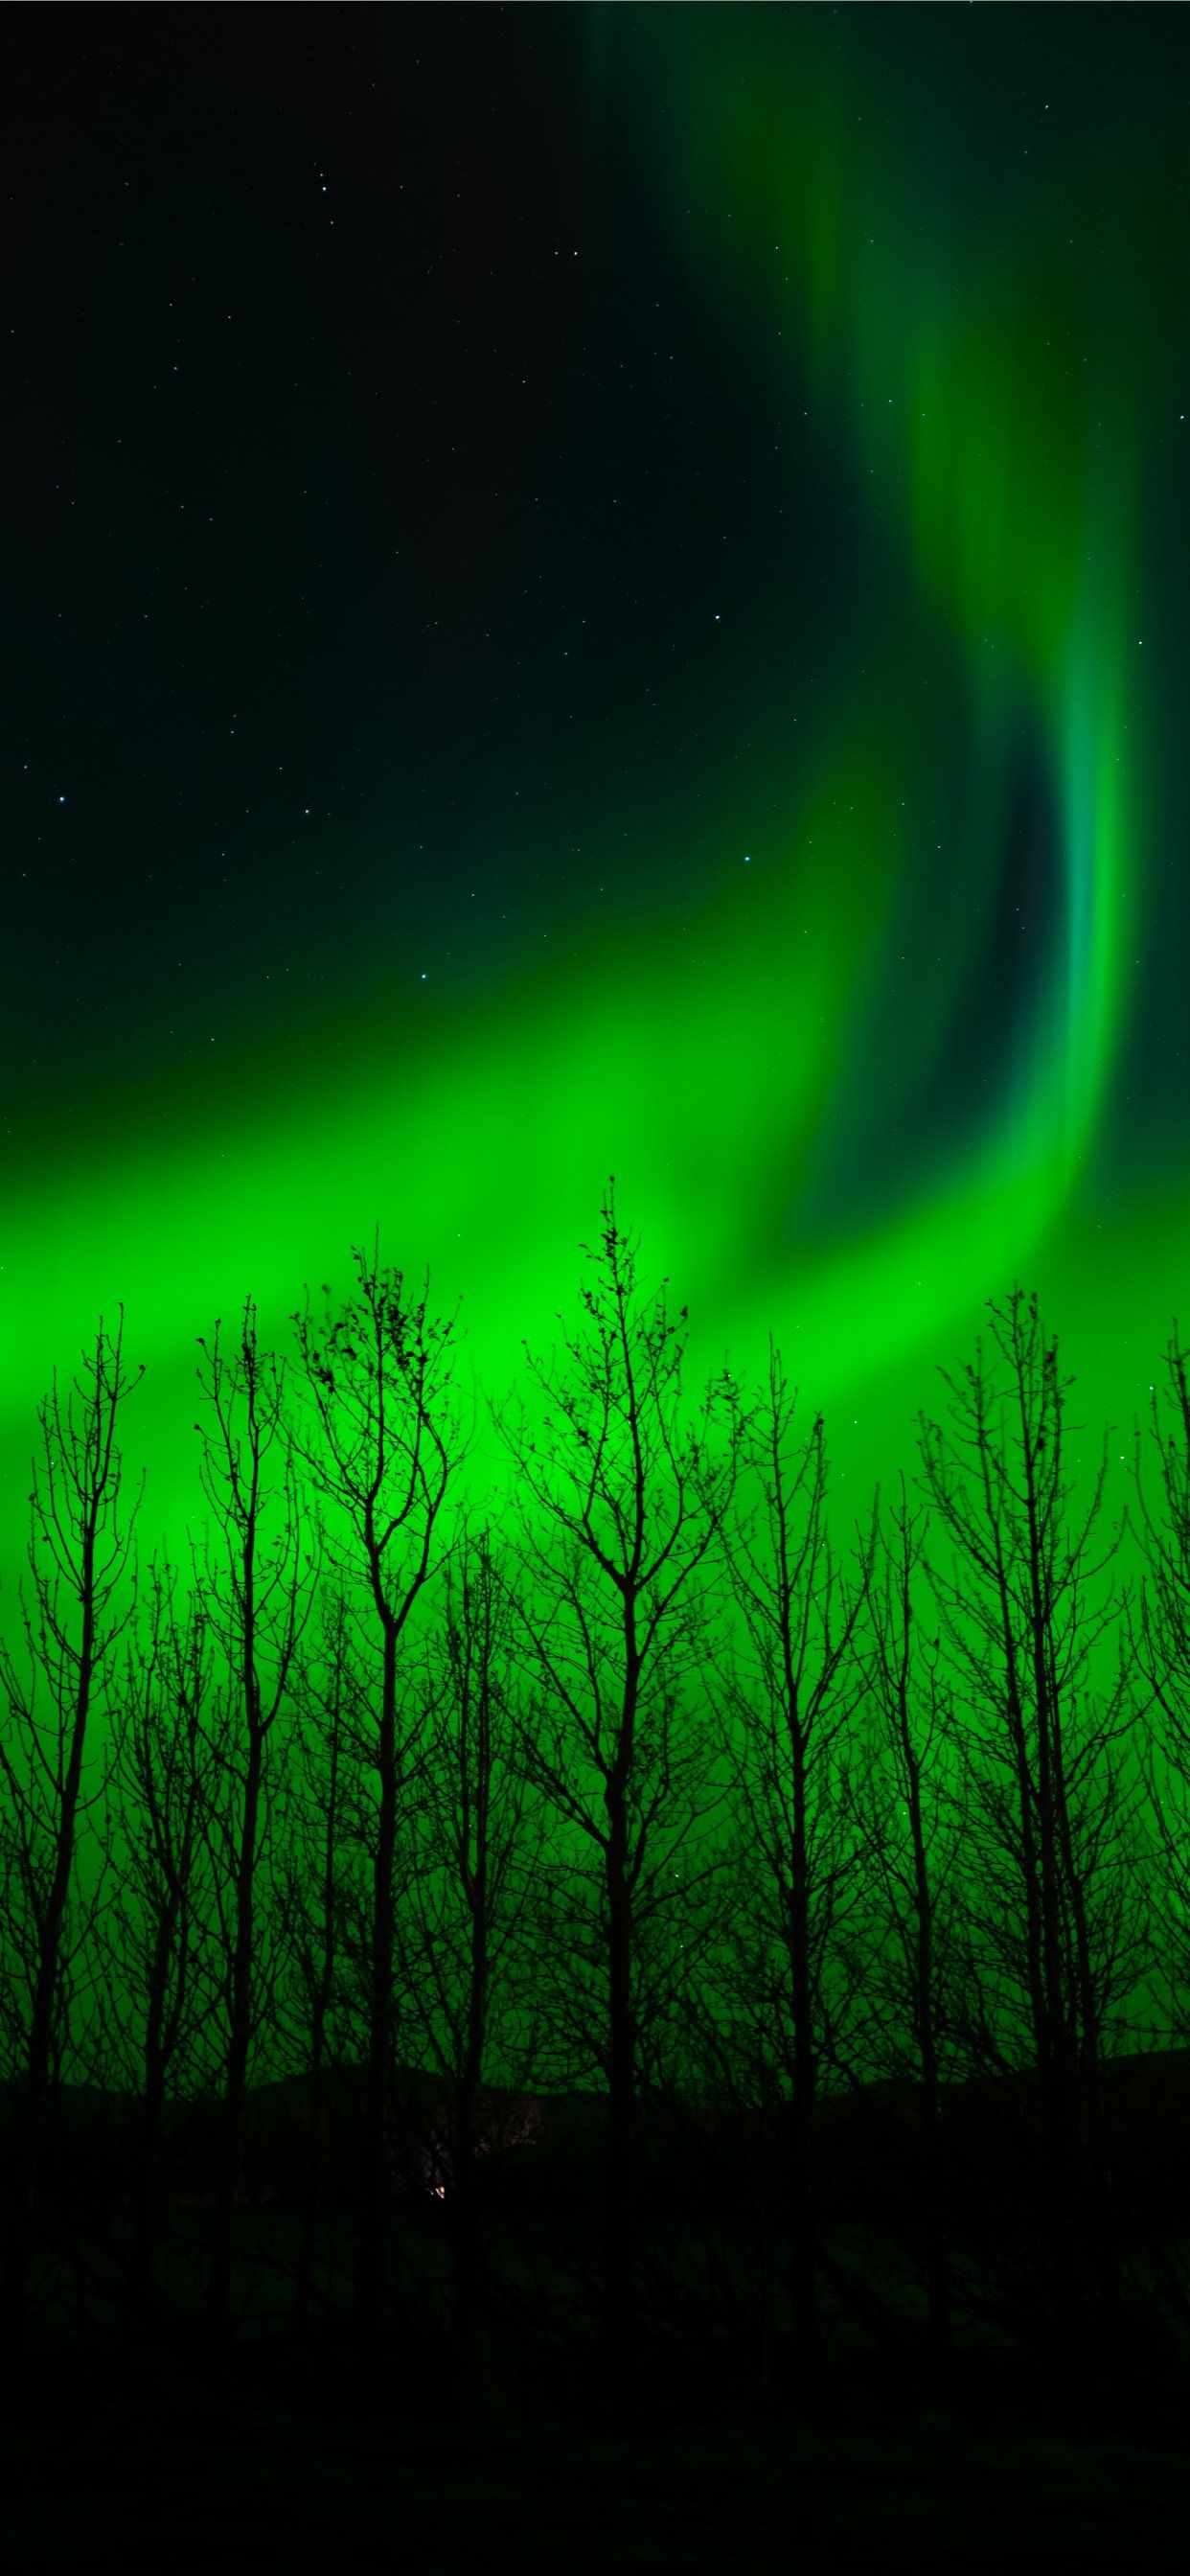 Northern lights over a forest in the night - Dark green